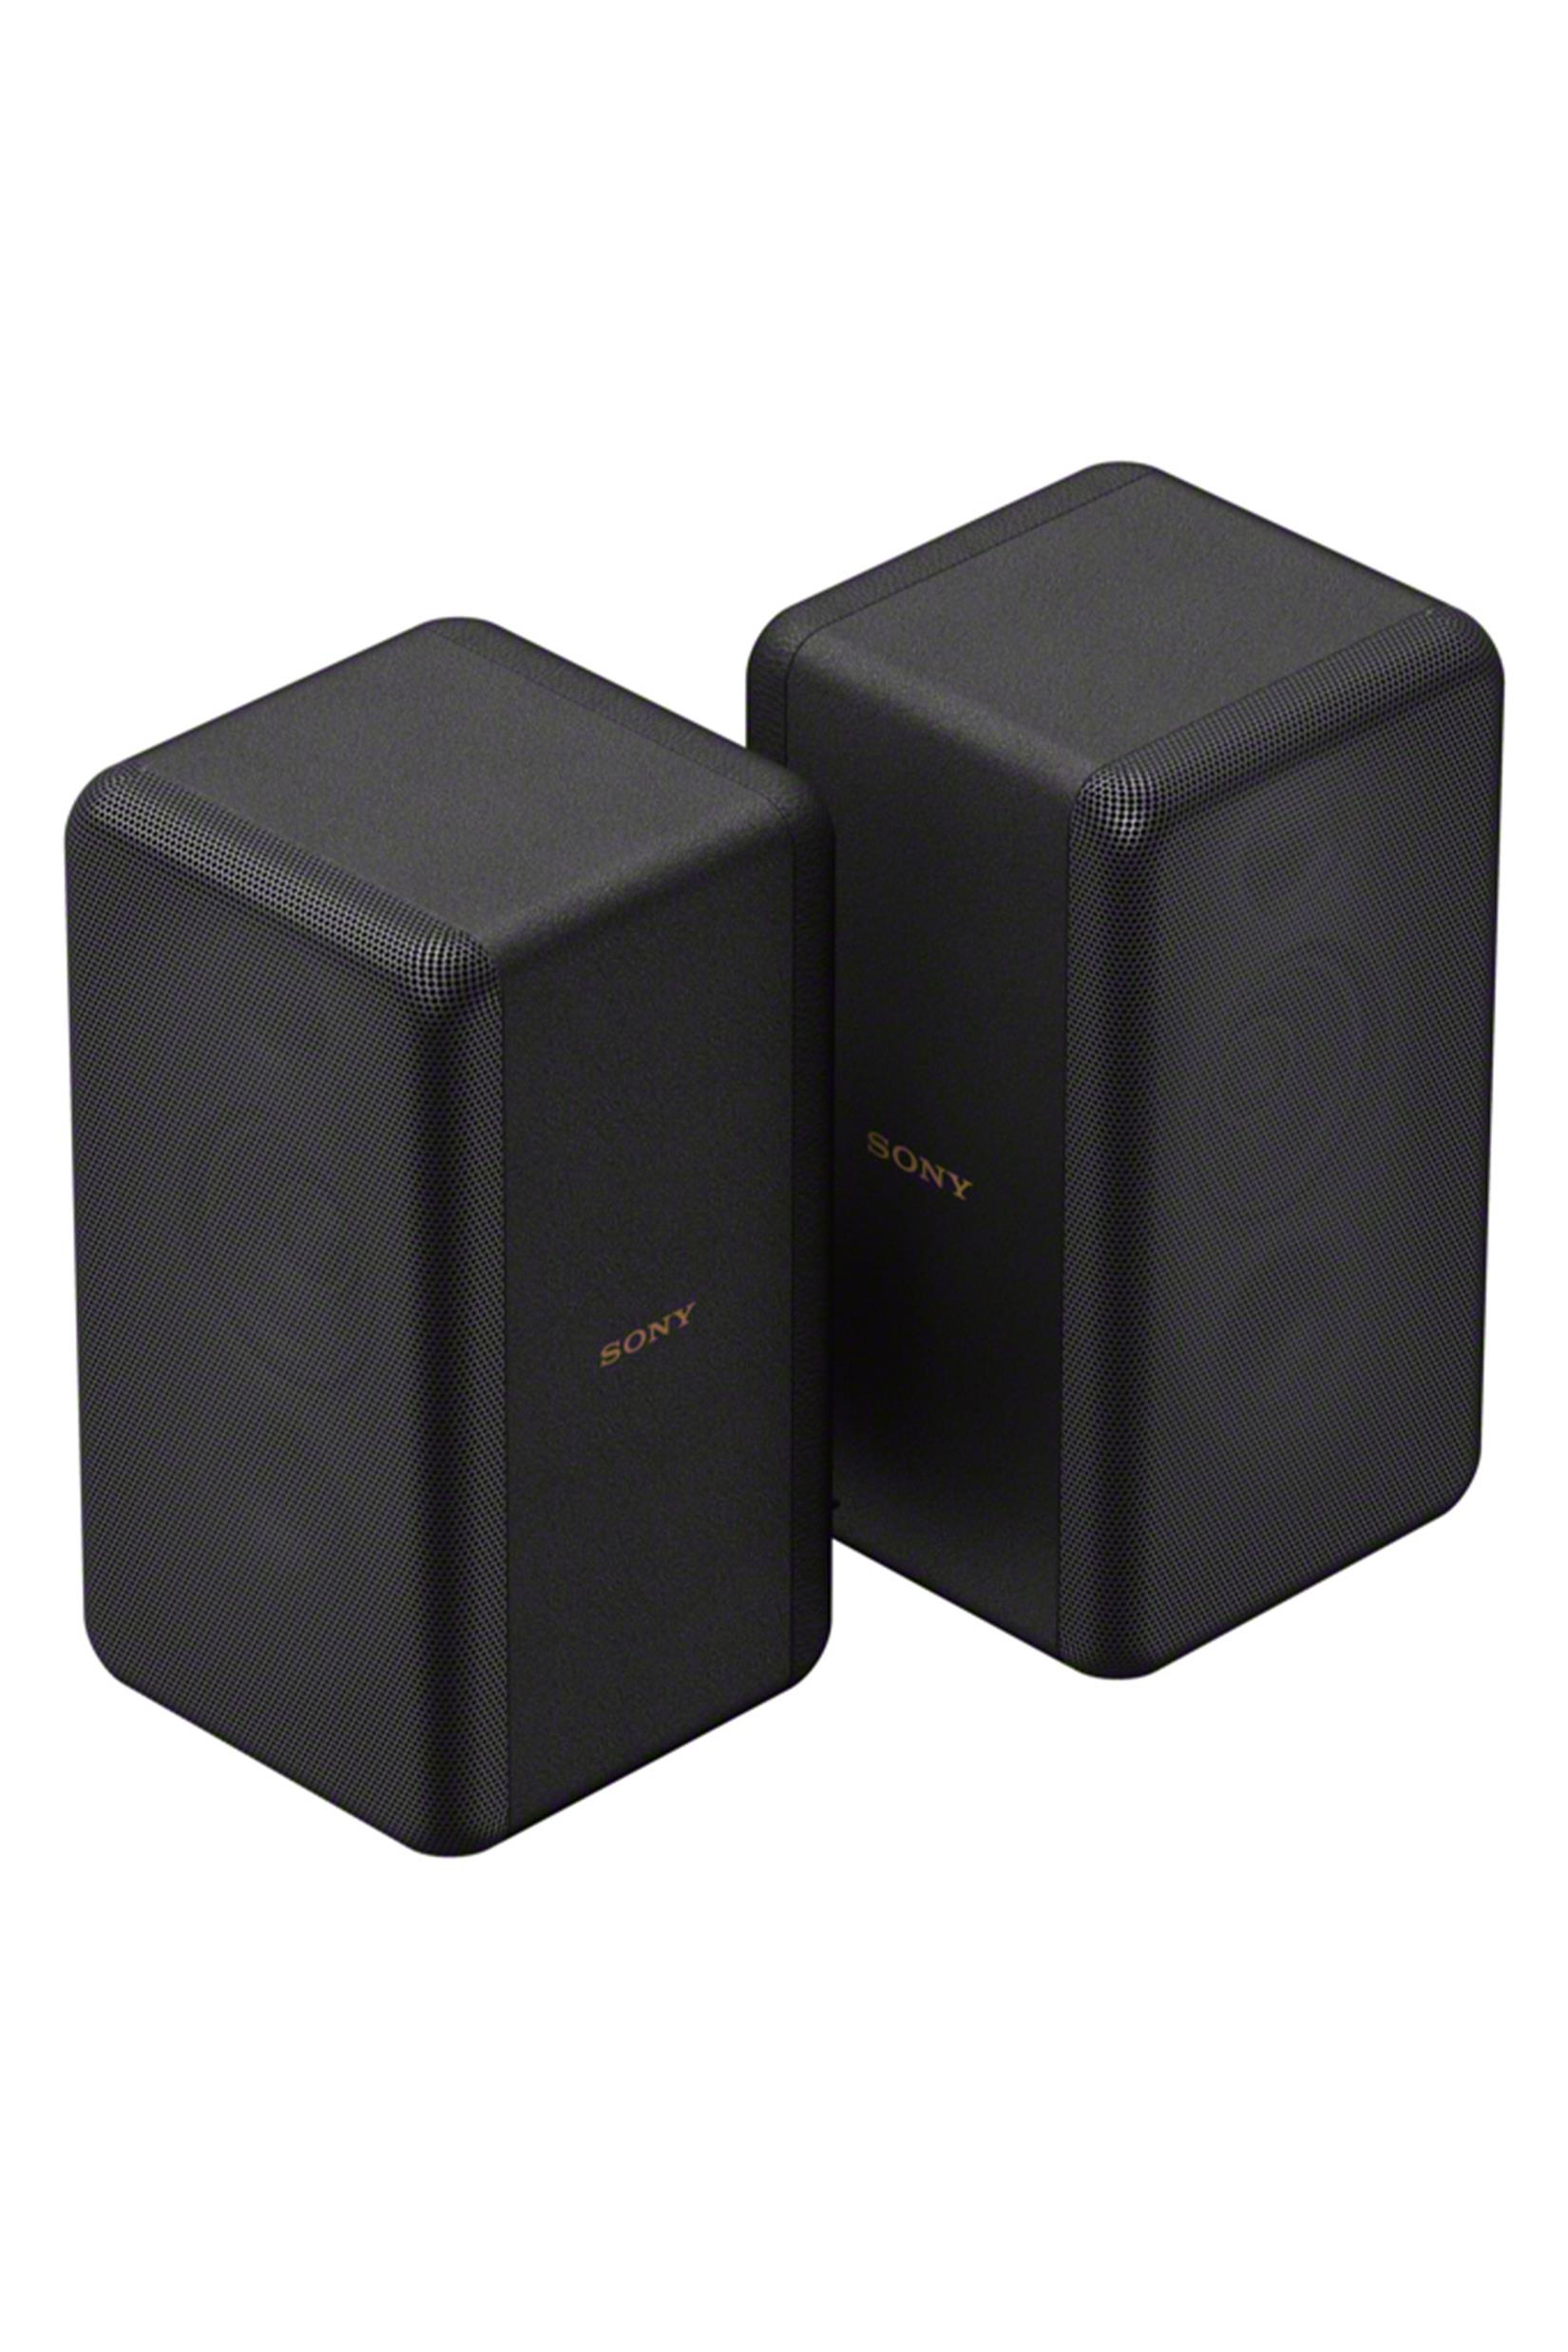 Sony SA-RS3S Wireless Rear Speakers for HT-A7000 (Pair) - image 4 of 4